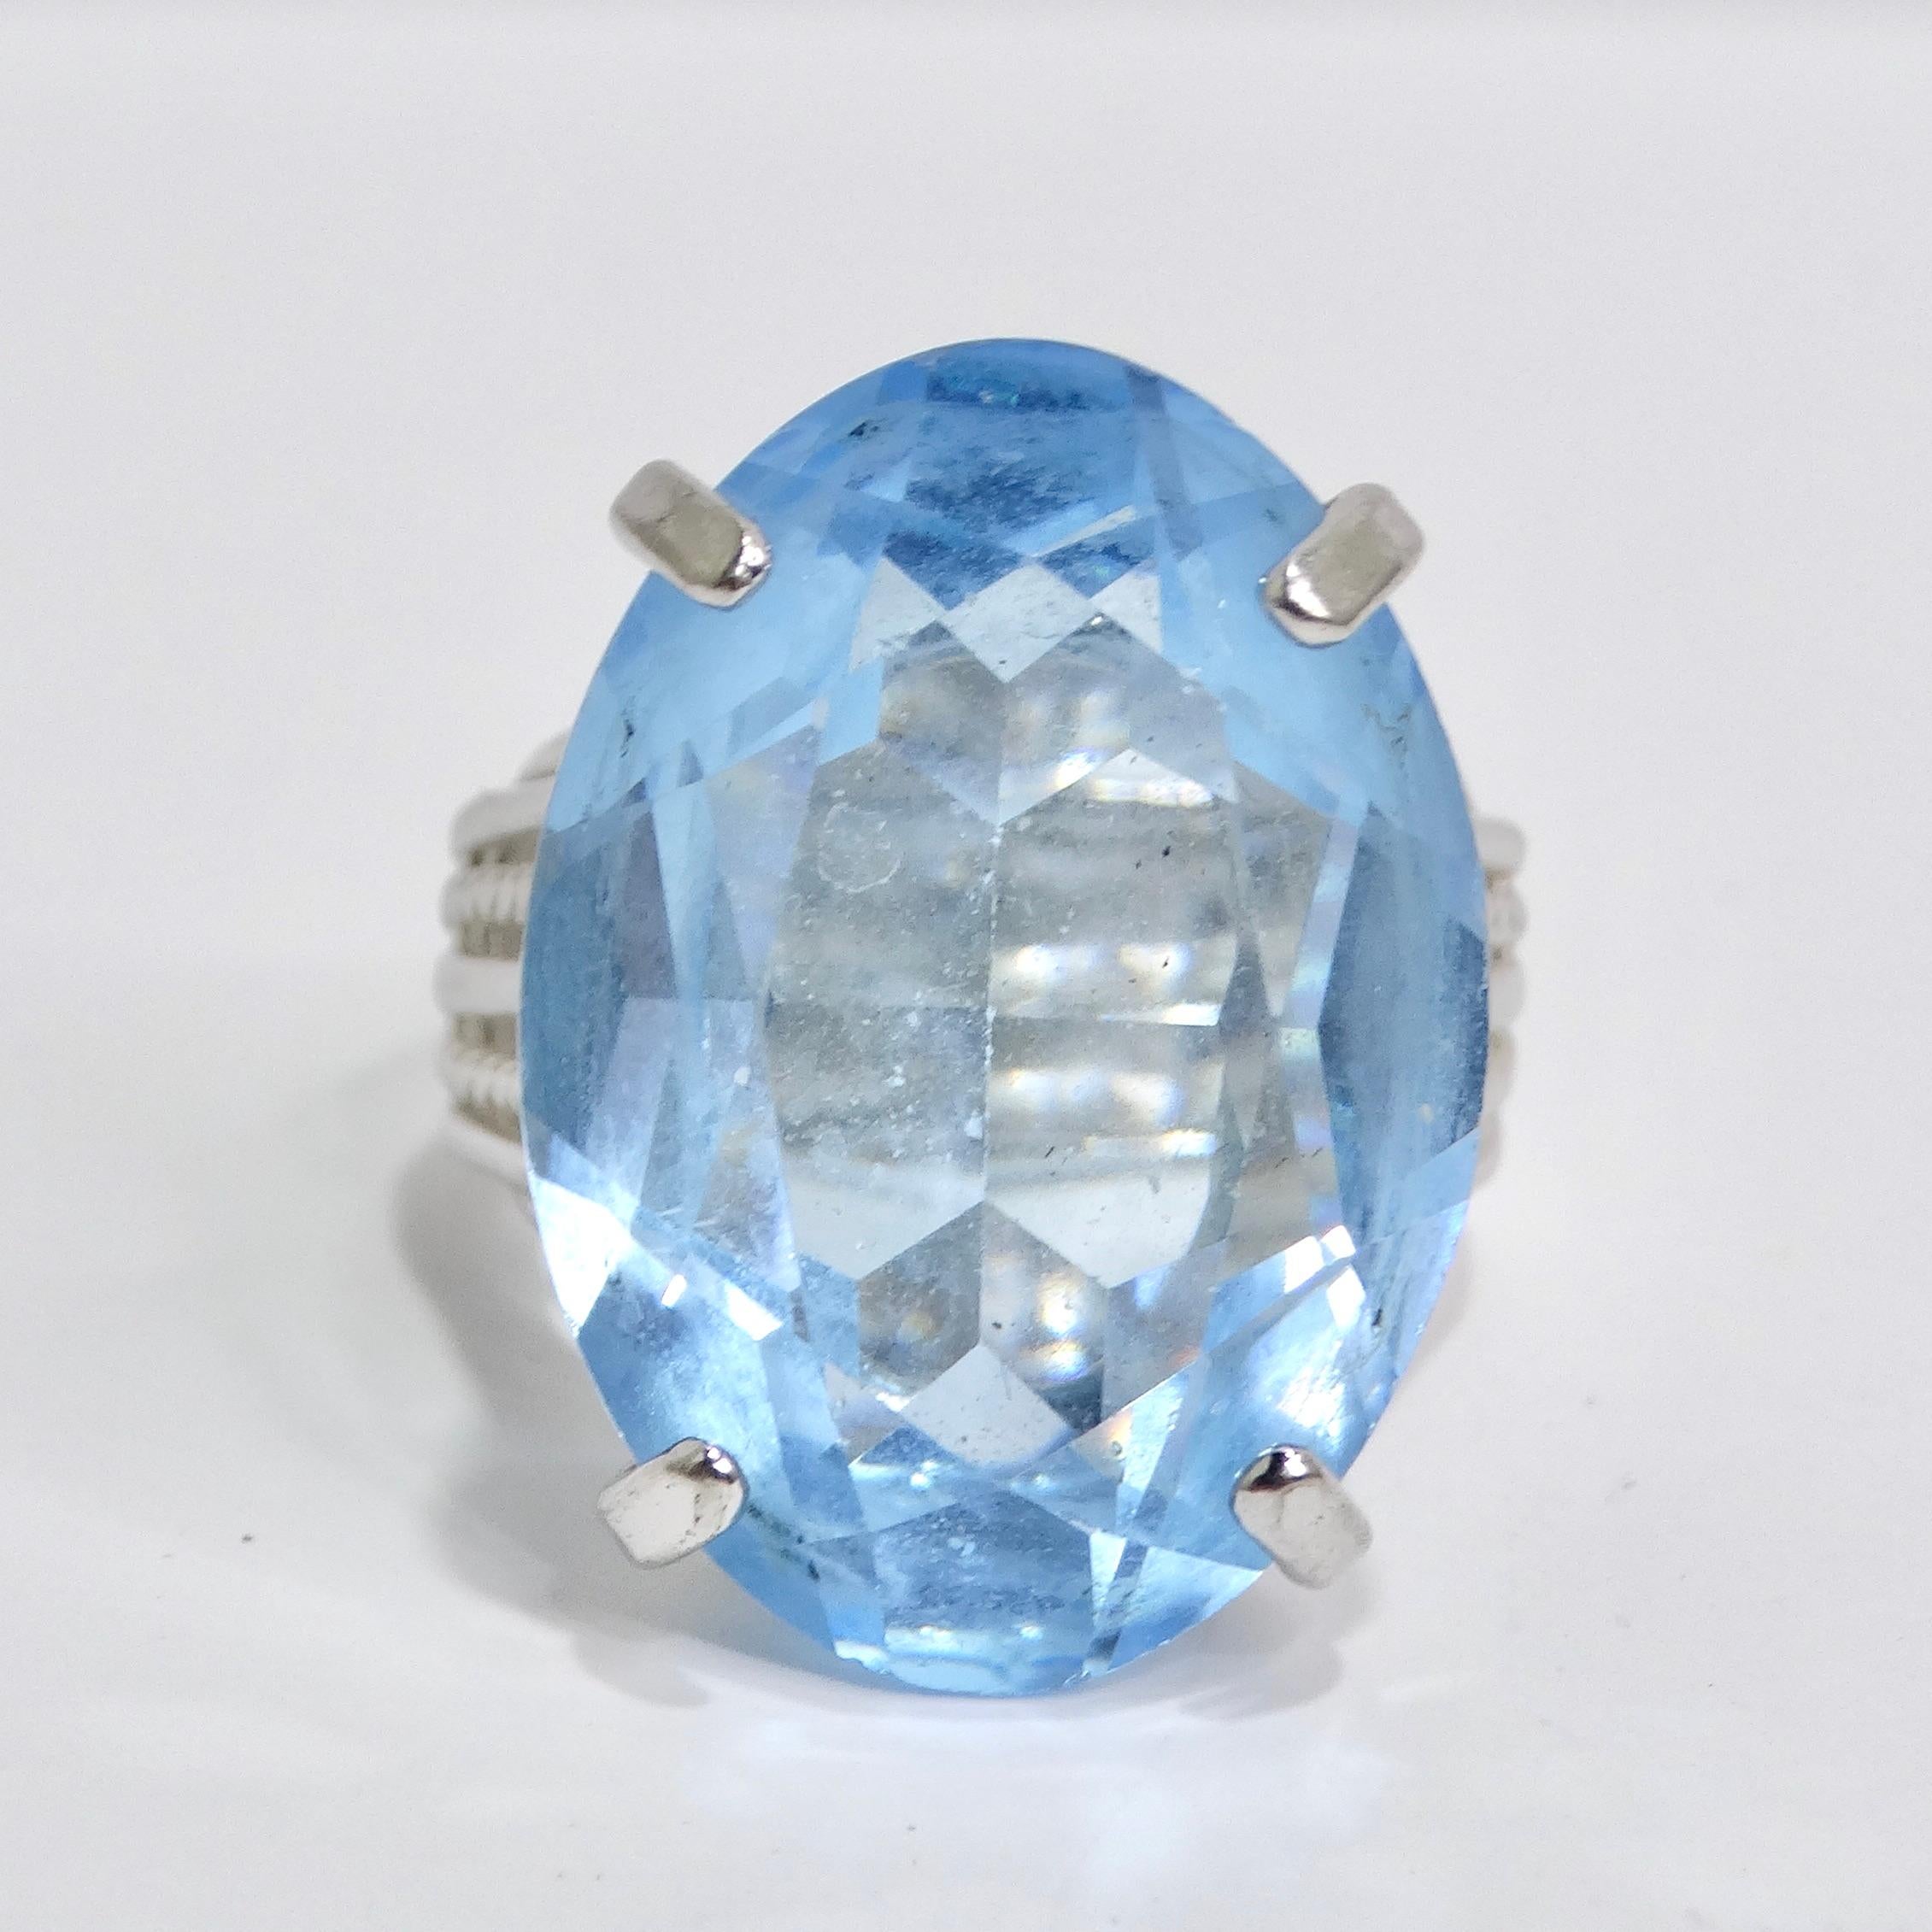 Step into the enchanting world of the 1970s with our magnificent Synthetic Aquamarine Silver Plated Cocktail Ring. This vintage-inspired masterpiece features a generously sized, eye-catching synthetic aquamarine stone set in a silver-plated band. A